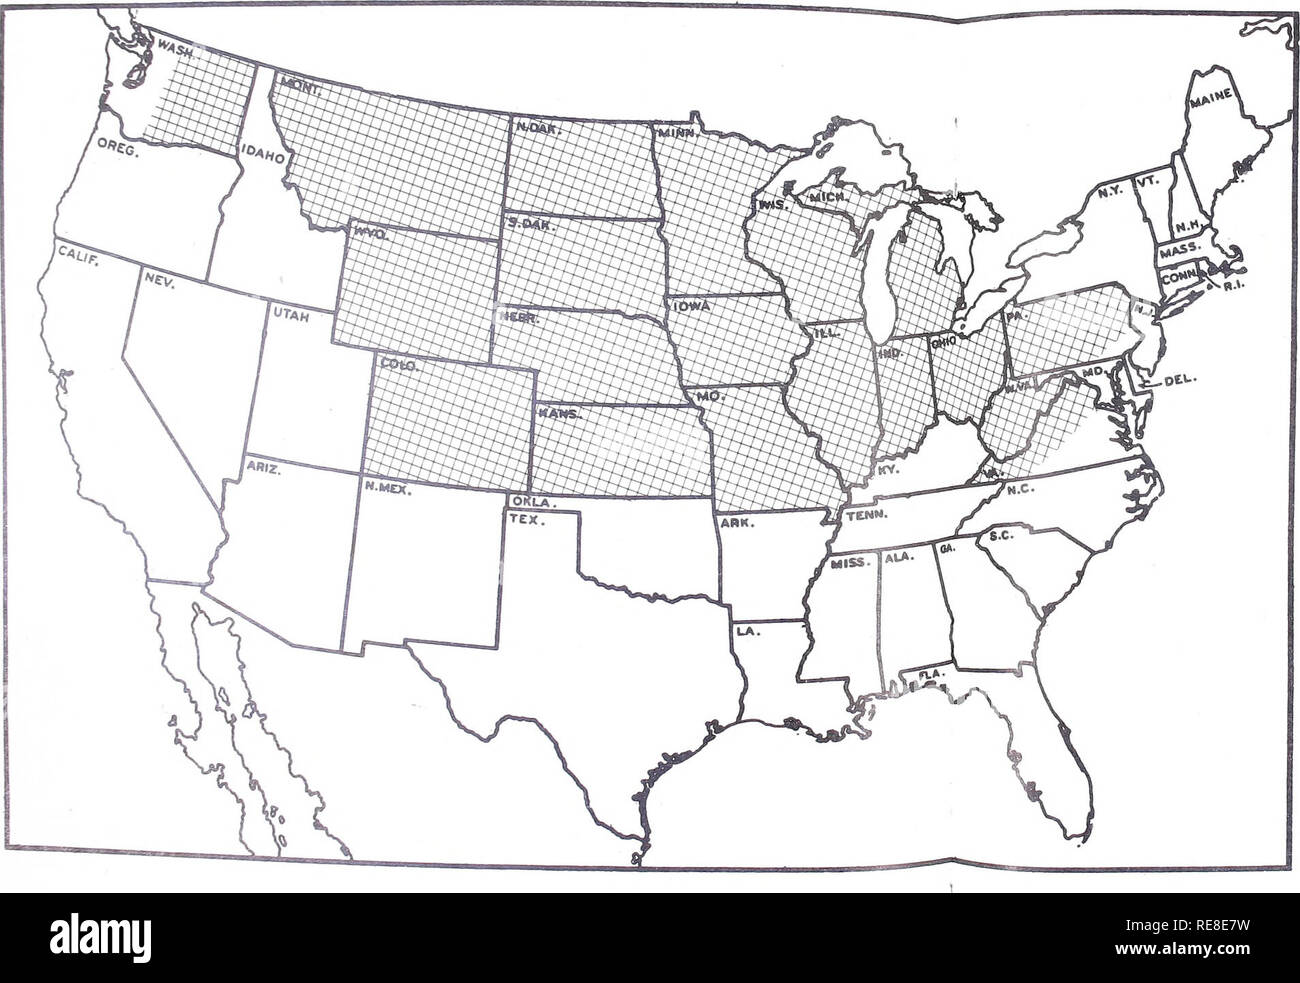 . Cooperative economic insect report. Insect pests Control United States Periodicals. BLACK STEM RUST QUARANTINE Regulations apply to all States; Areas shaded are designated as eradication areas.. S. Department of Agriculture Vkultural Research Service Restrictions are imposed on the interstate movement of regulated articles as follows: 1. Berberis, Mahoberberis and Mahonia Plants: a. Rust-susceptible plants — movement prohibited. b. Rust-resistant plants--movement allowed under certificate or from nurseries on approved list without certificate. 2. Seeds and Fruits of Berberis and Mahoberberis Stock Photo